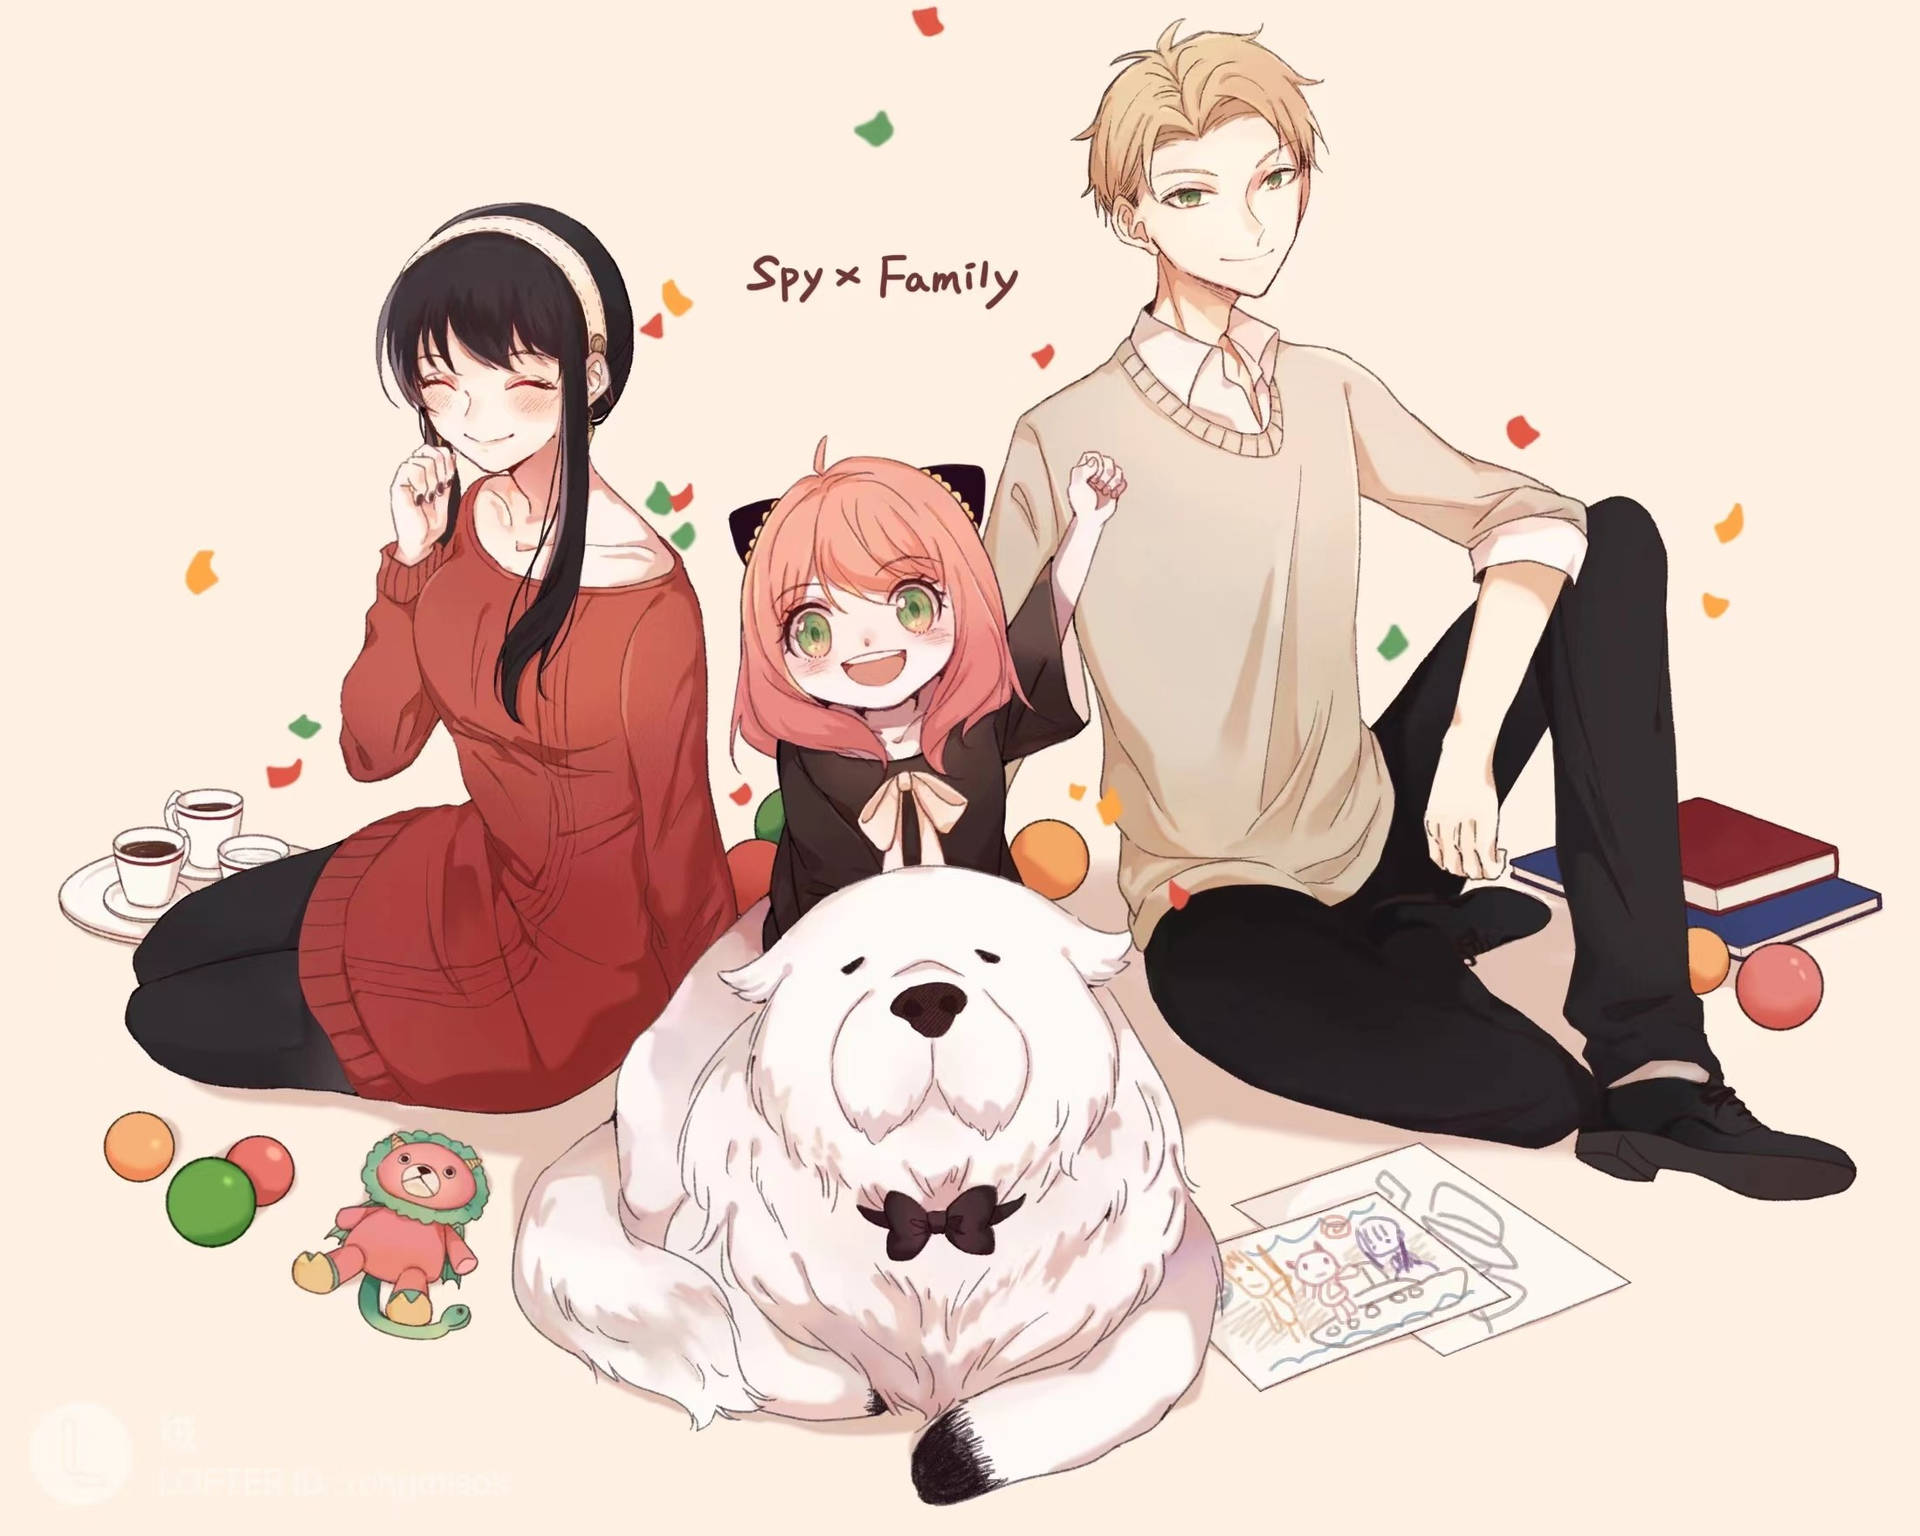 Download Spy X Family Seated Together Wallpaper